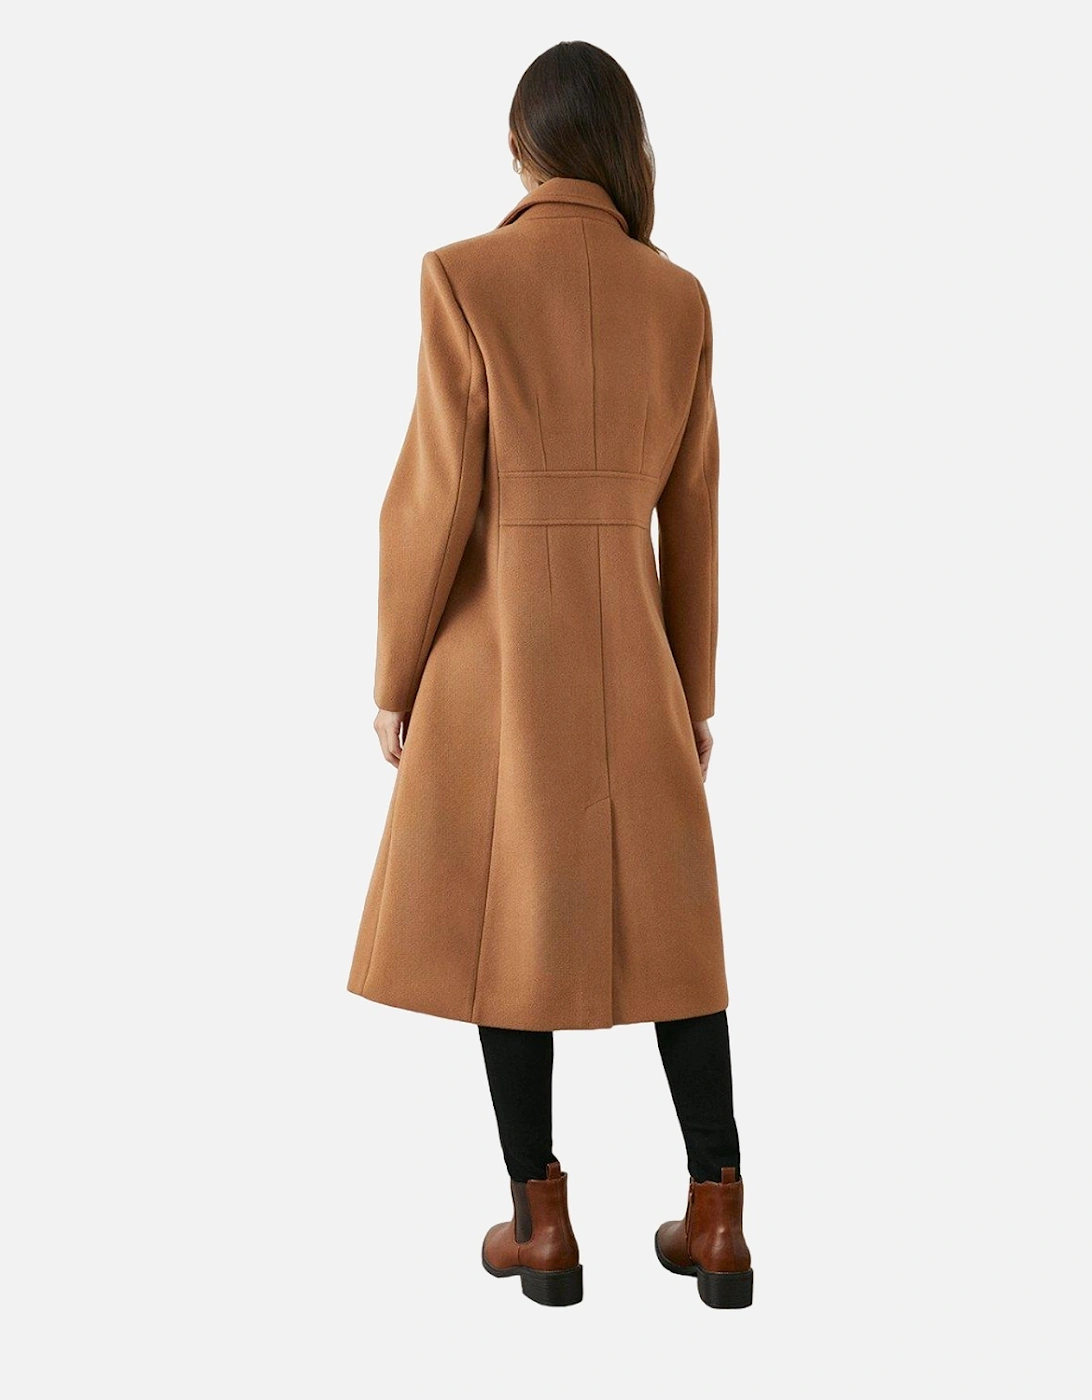 Womens/Ladies Single-Breasted Tailored Coat